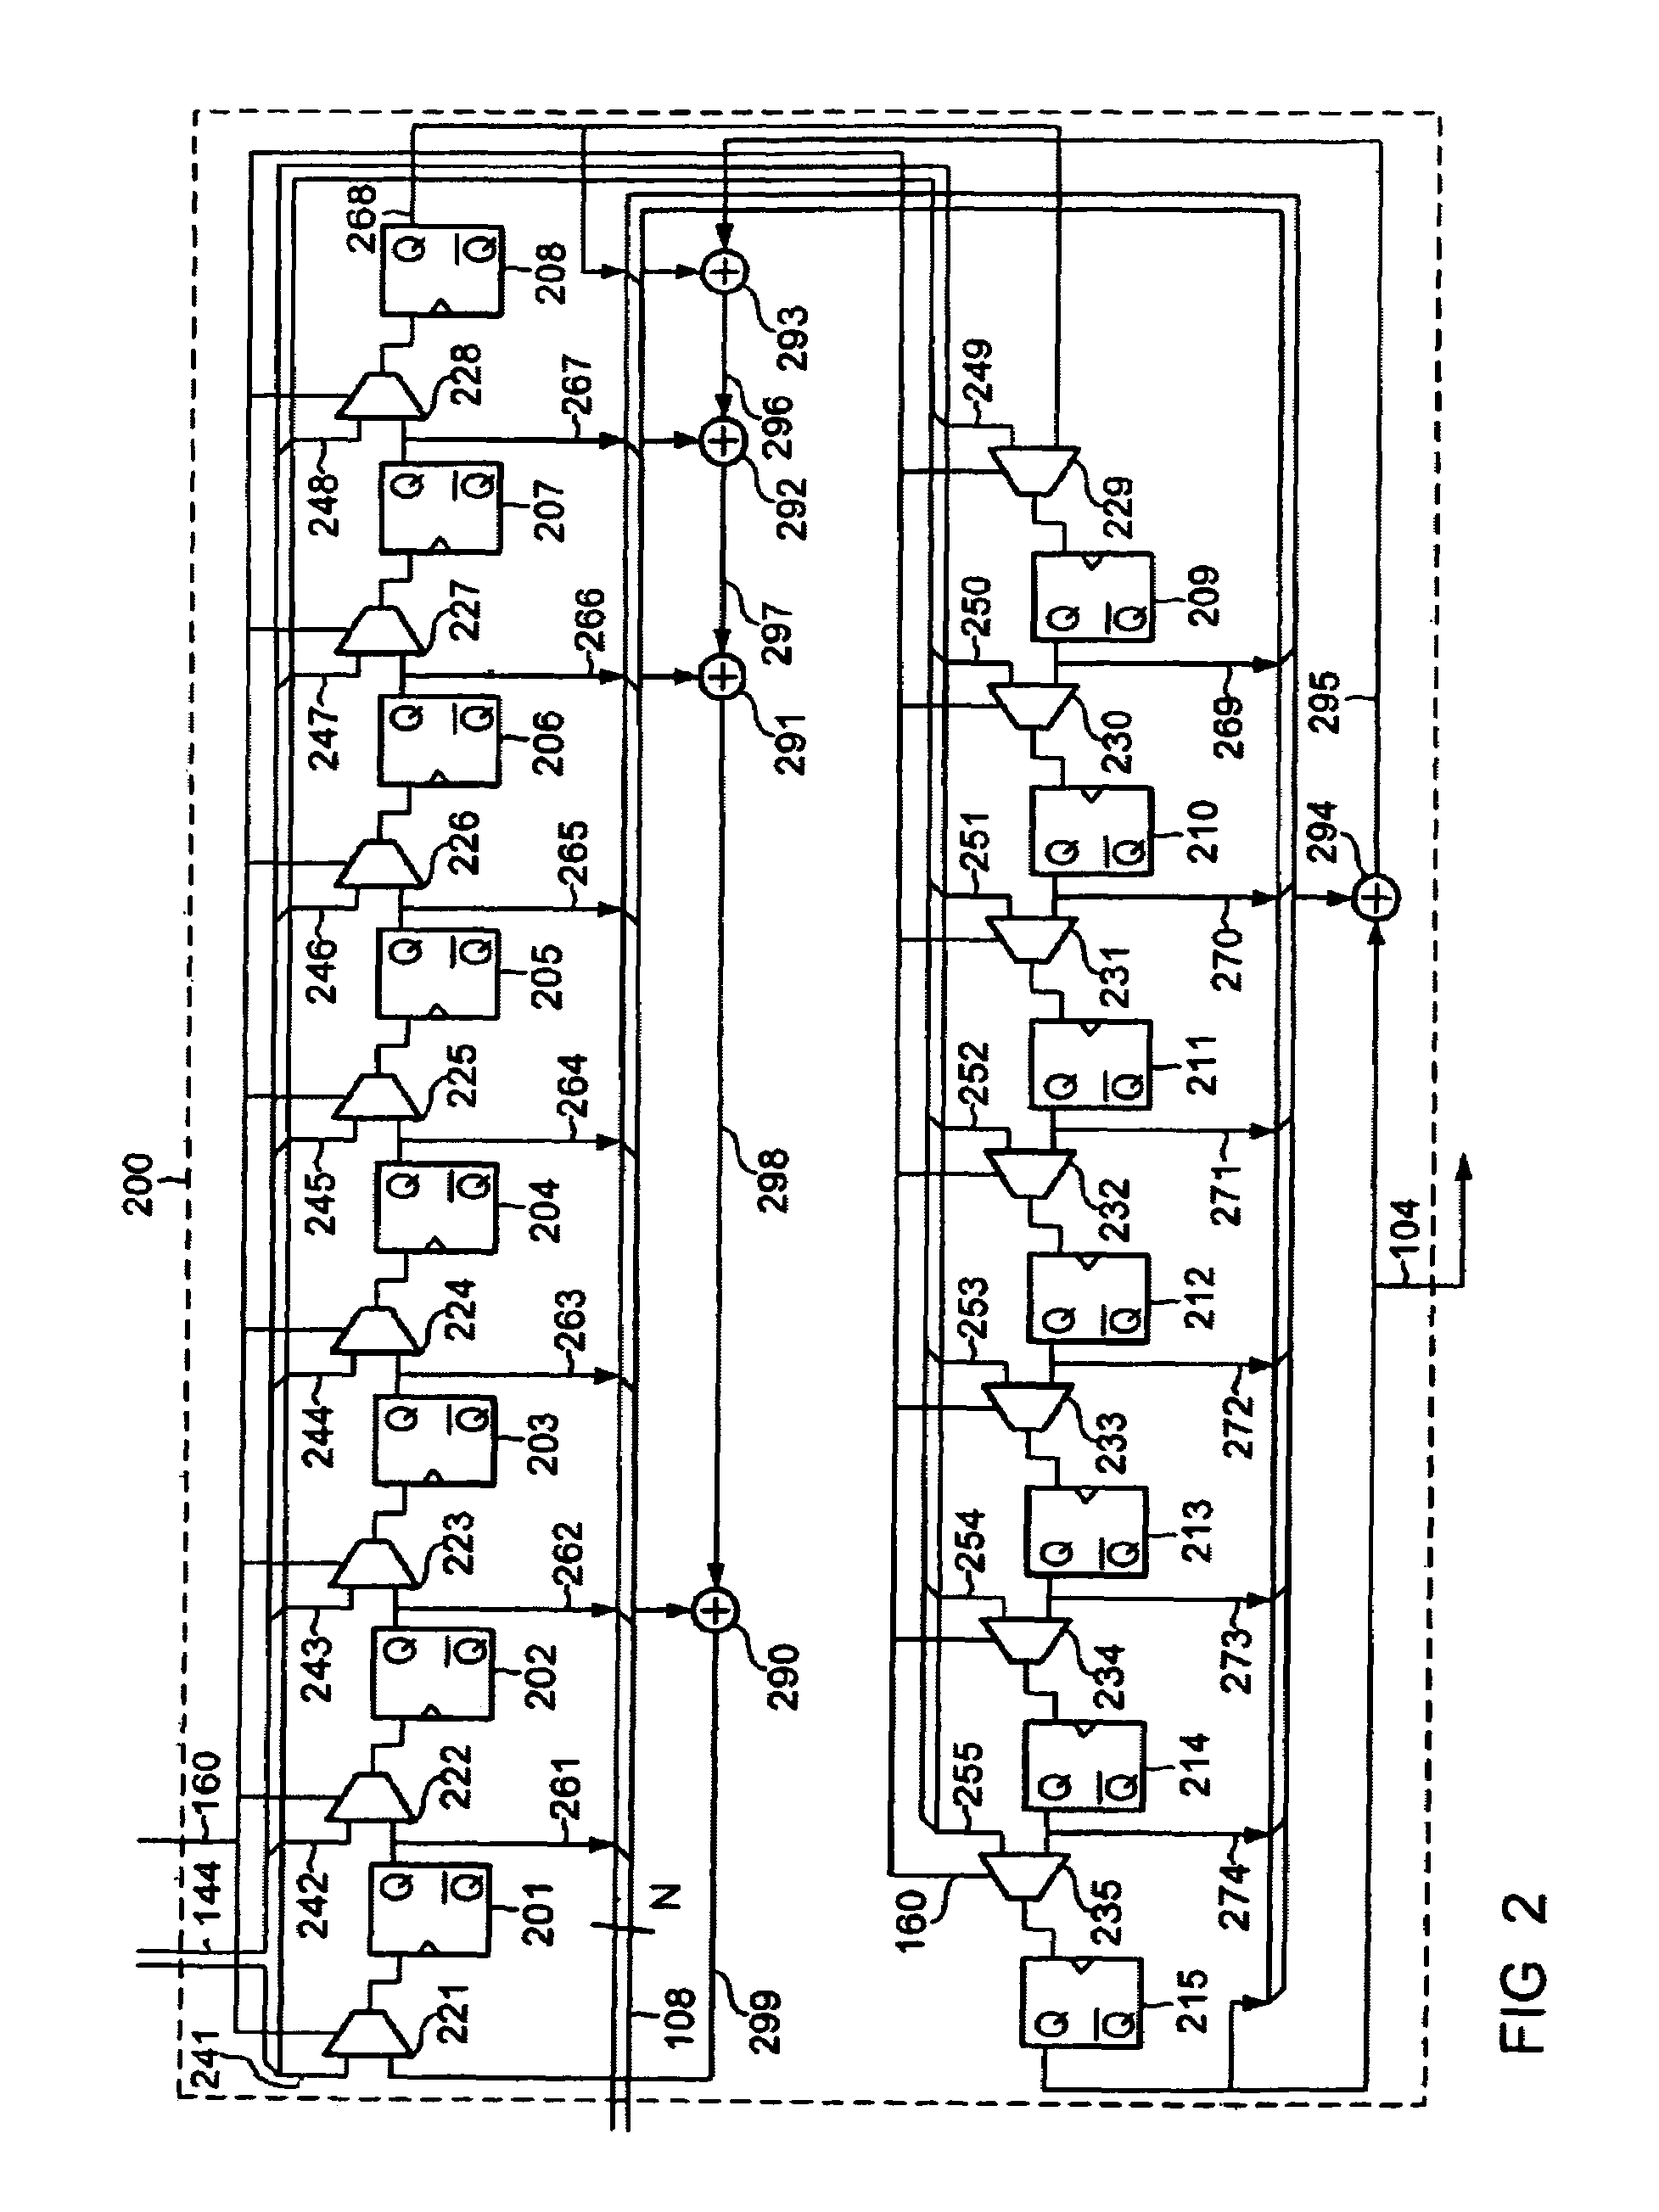 Apparatus and method for immediate non-sequential state transition in a PN code generator